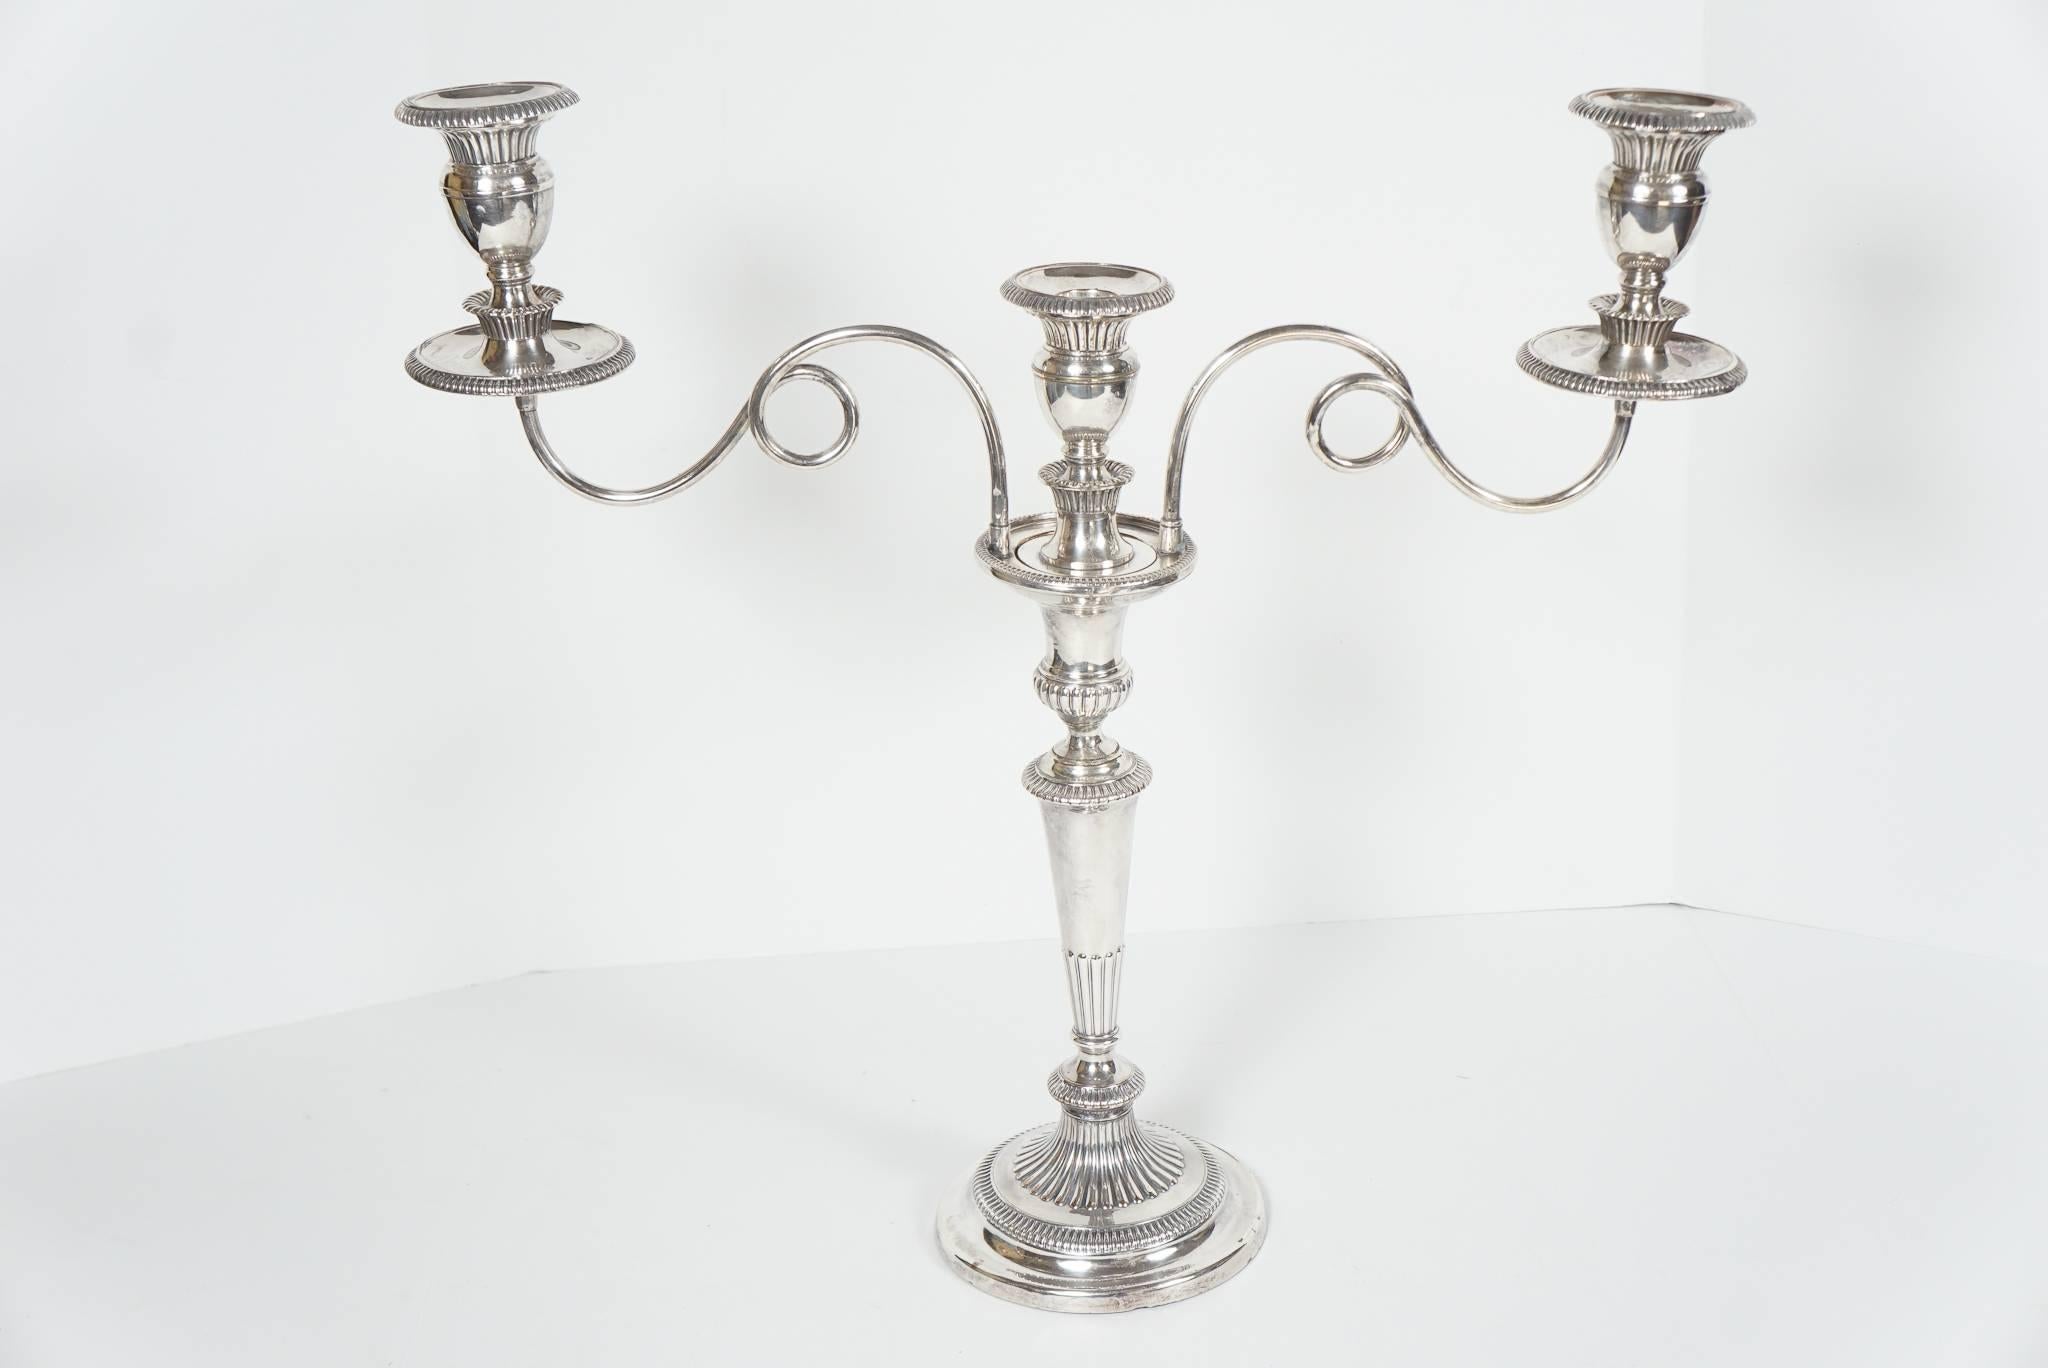 This very nice pair of Sheffield silver plate candelabra are of excellent form and quality. The early use of the medium created a vast Expansion of the ideals of table service and how dining made the acceptance of social graces open to ever larger